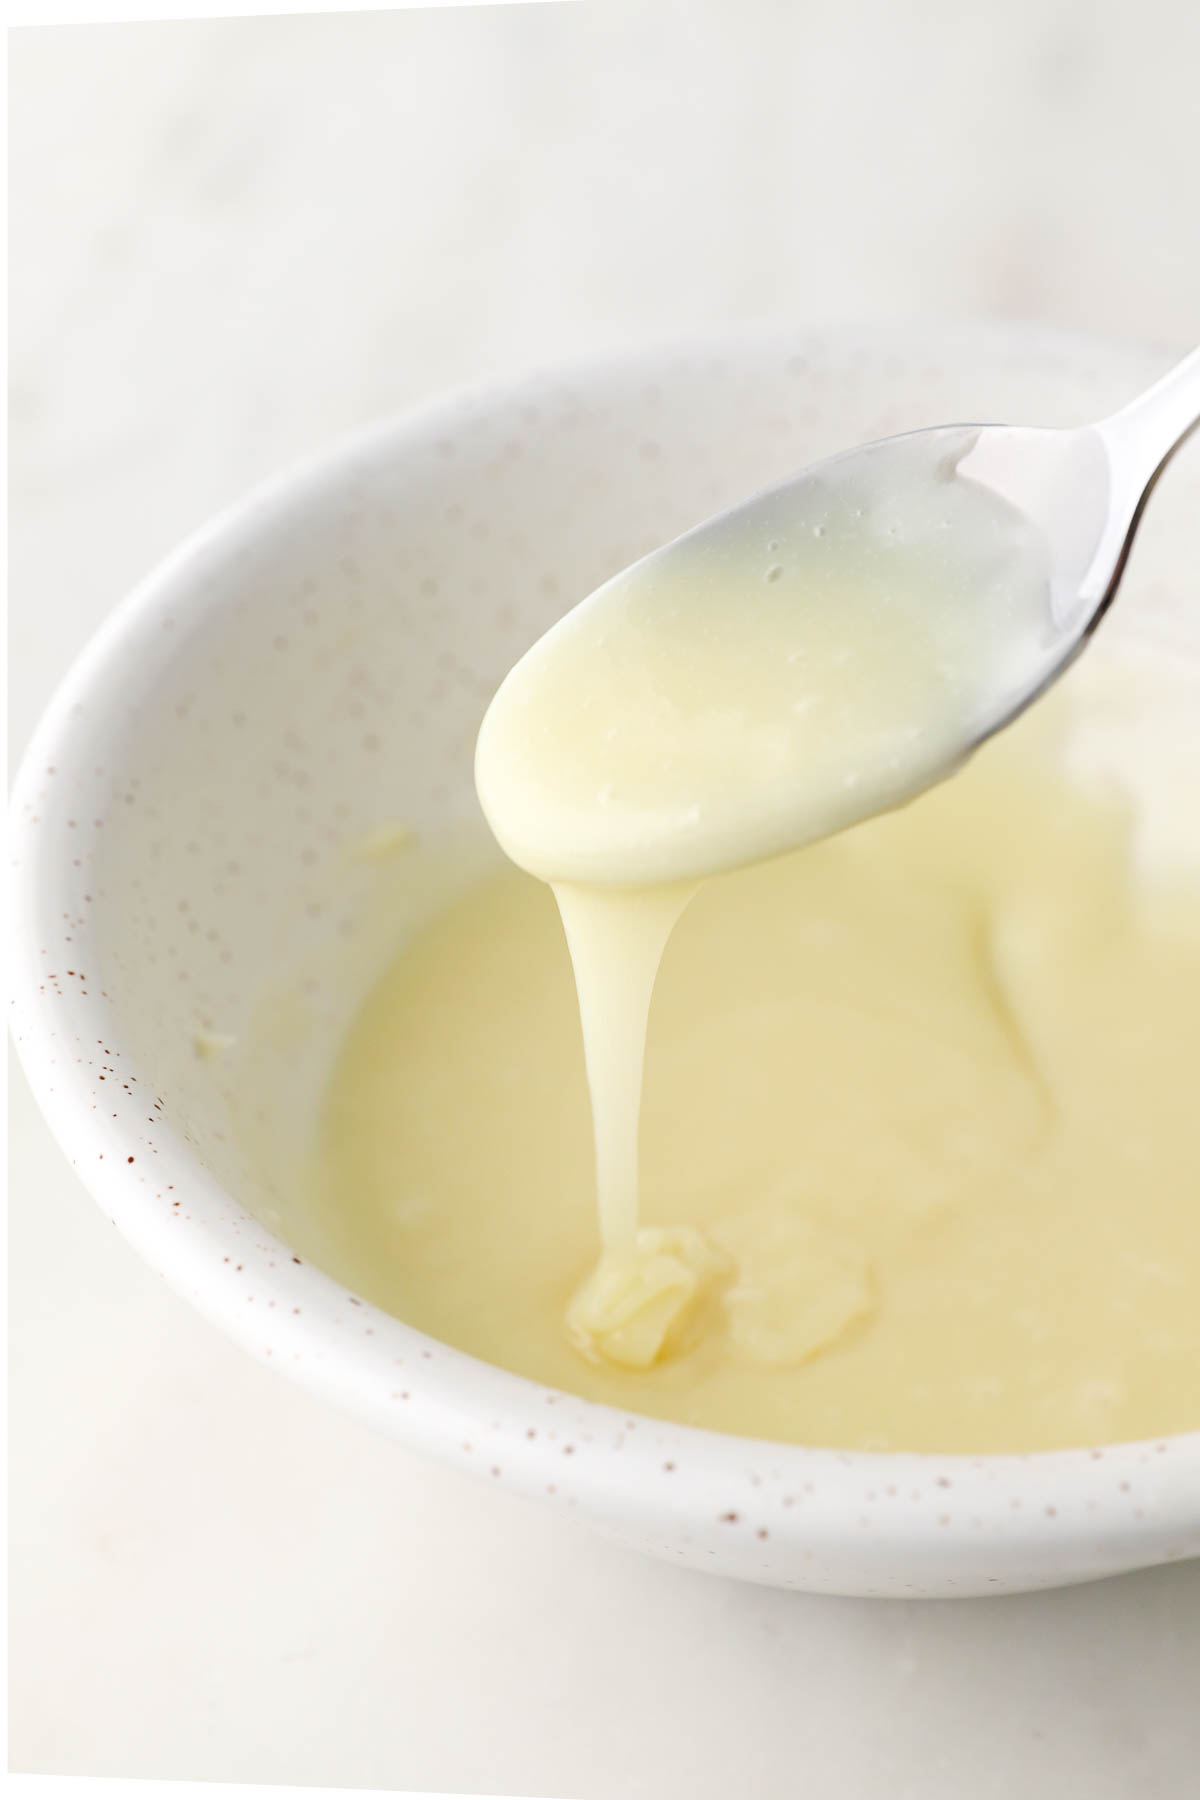 white chocolate ganache being drizzled off of a spoon over a bowl